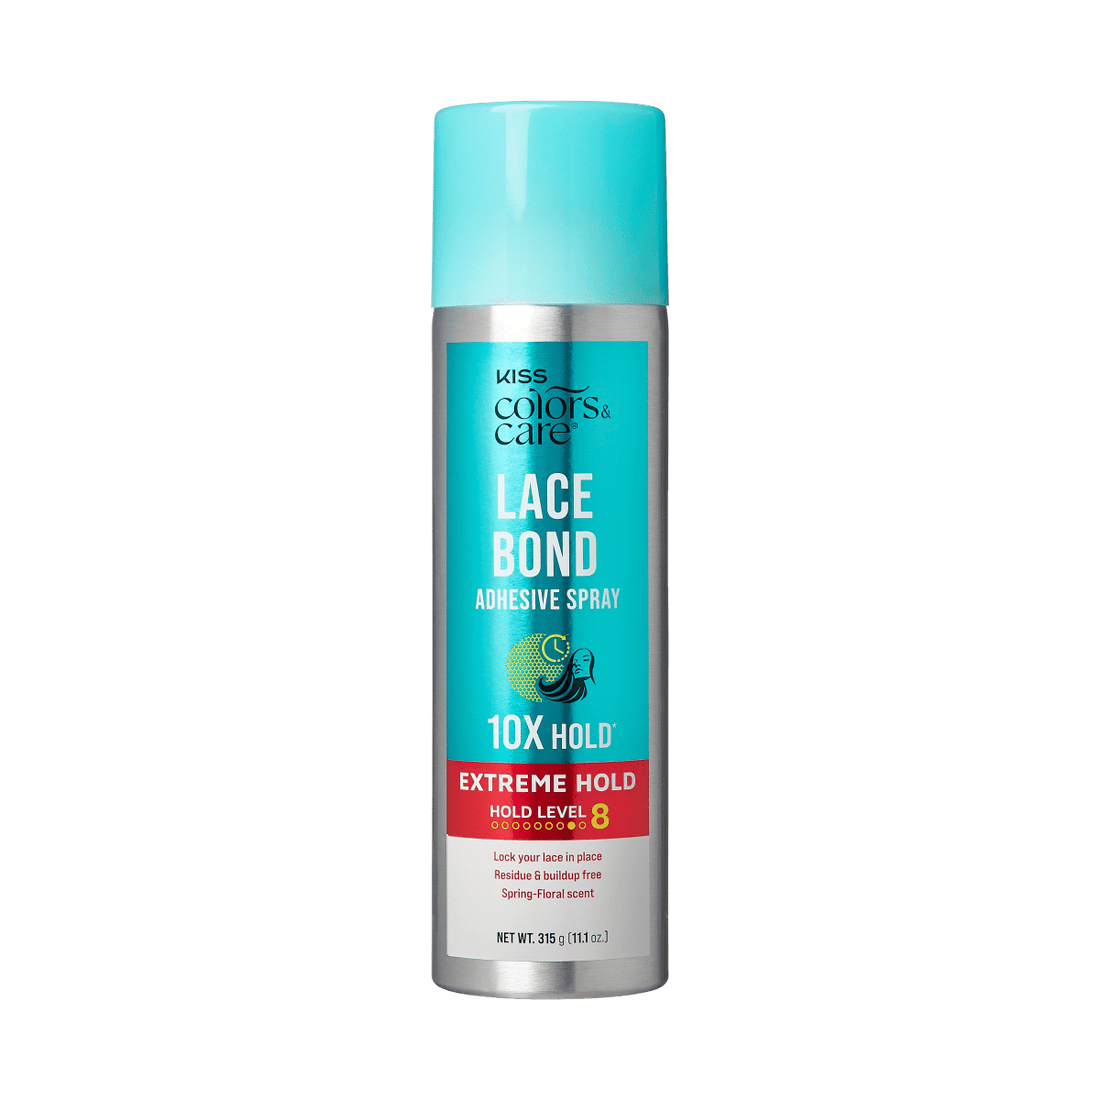 KISS Colors &amp; Care Lace Bond Adhesive Spray Extreme Hold, 11.1 oz.